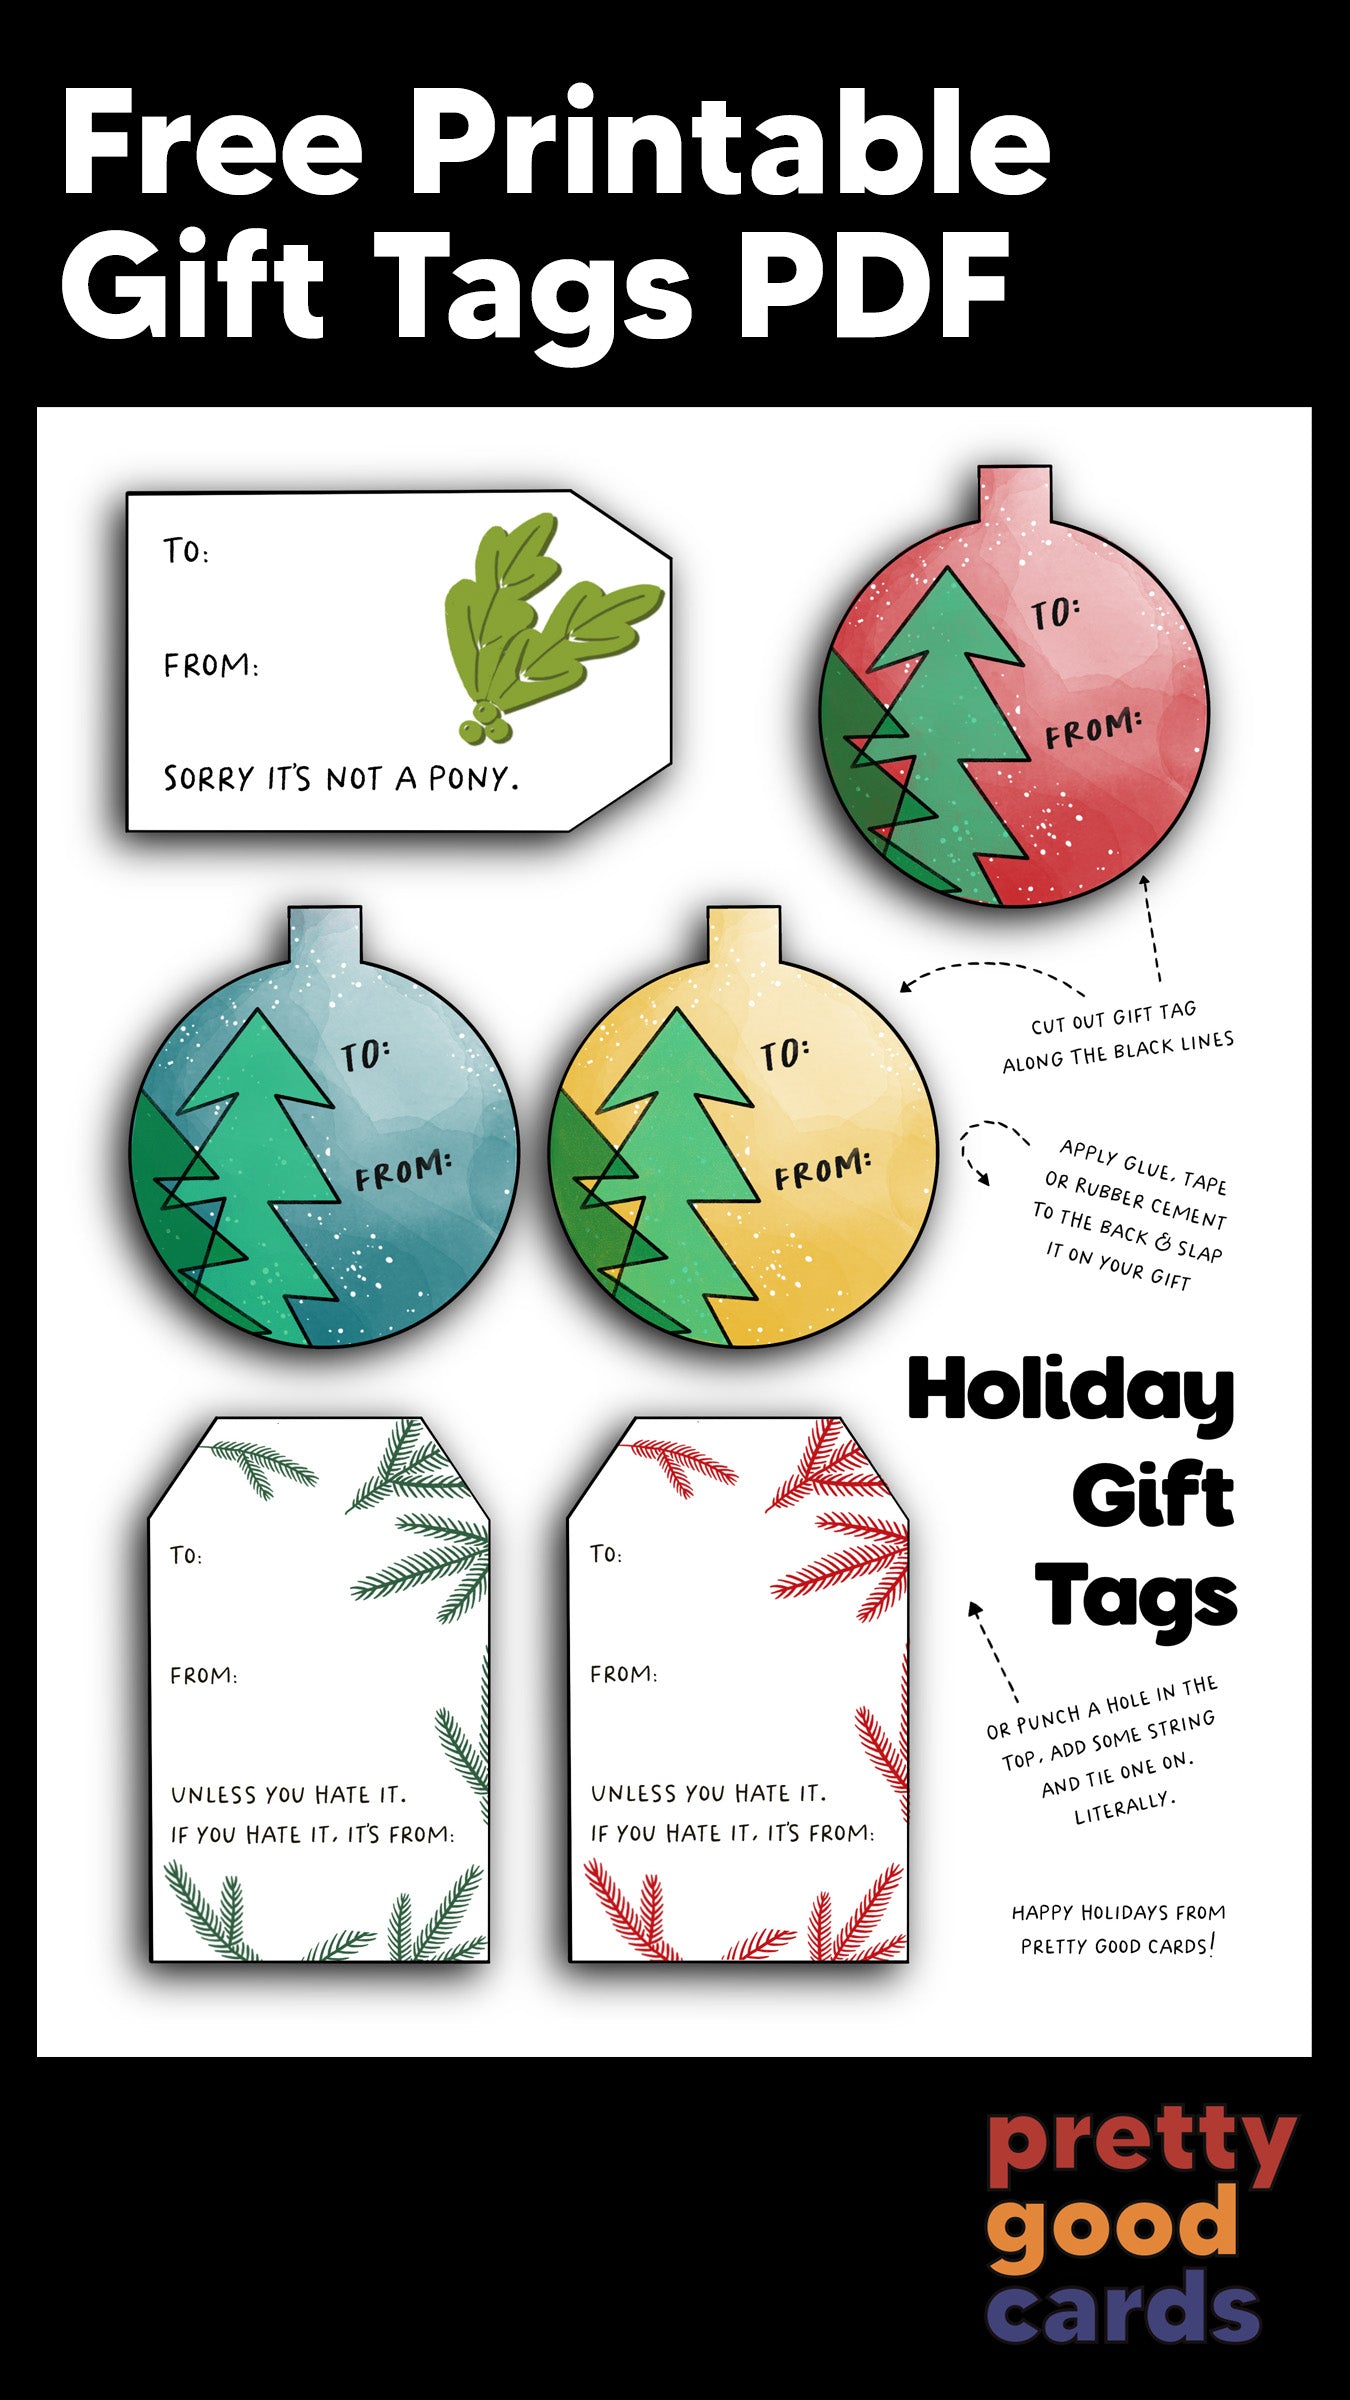 Need Some Last-Minute Gift Tags?